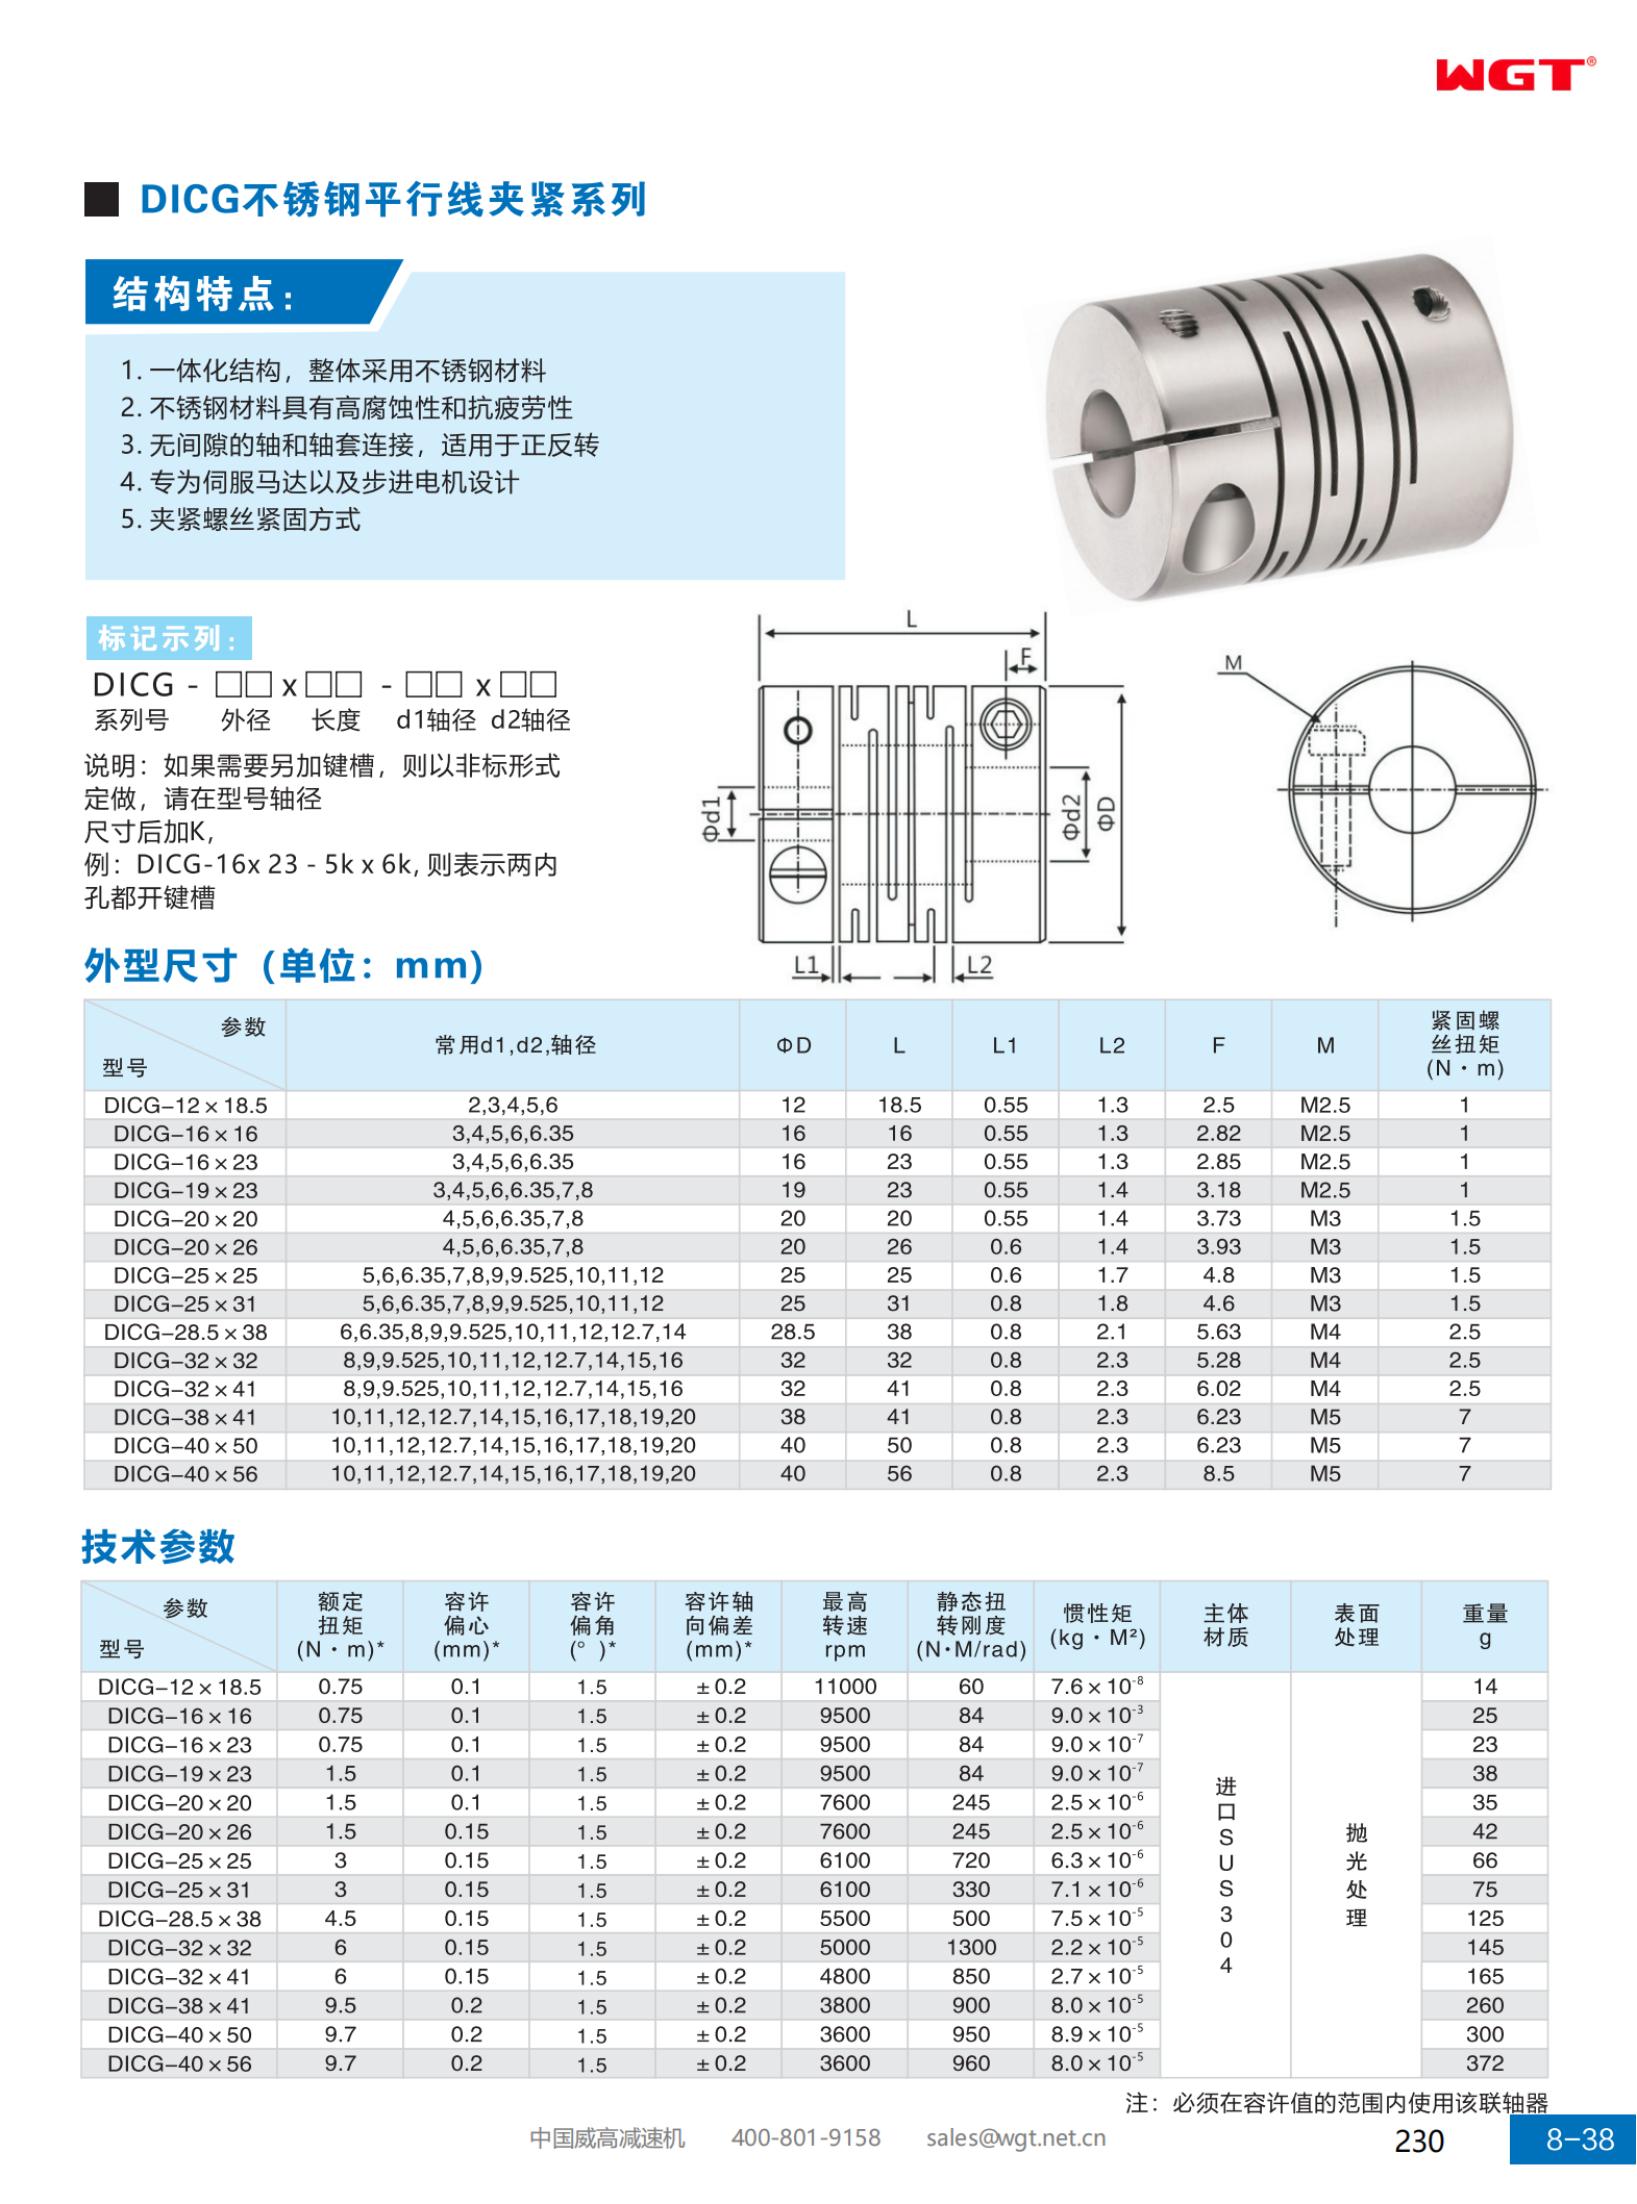 DICG stainless steel parallel line clamping series